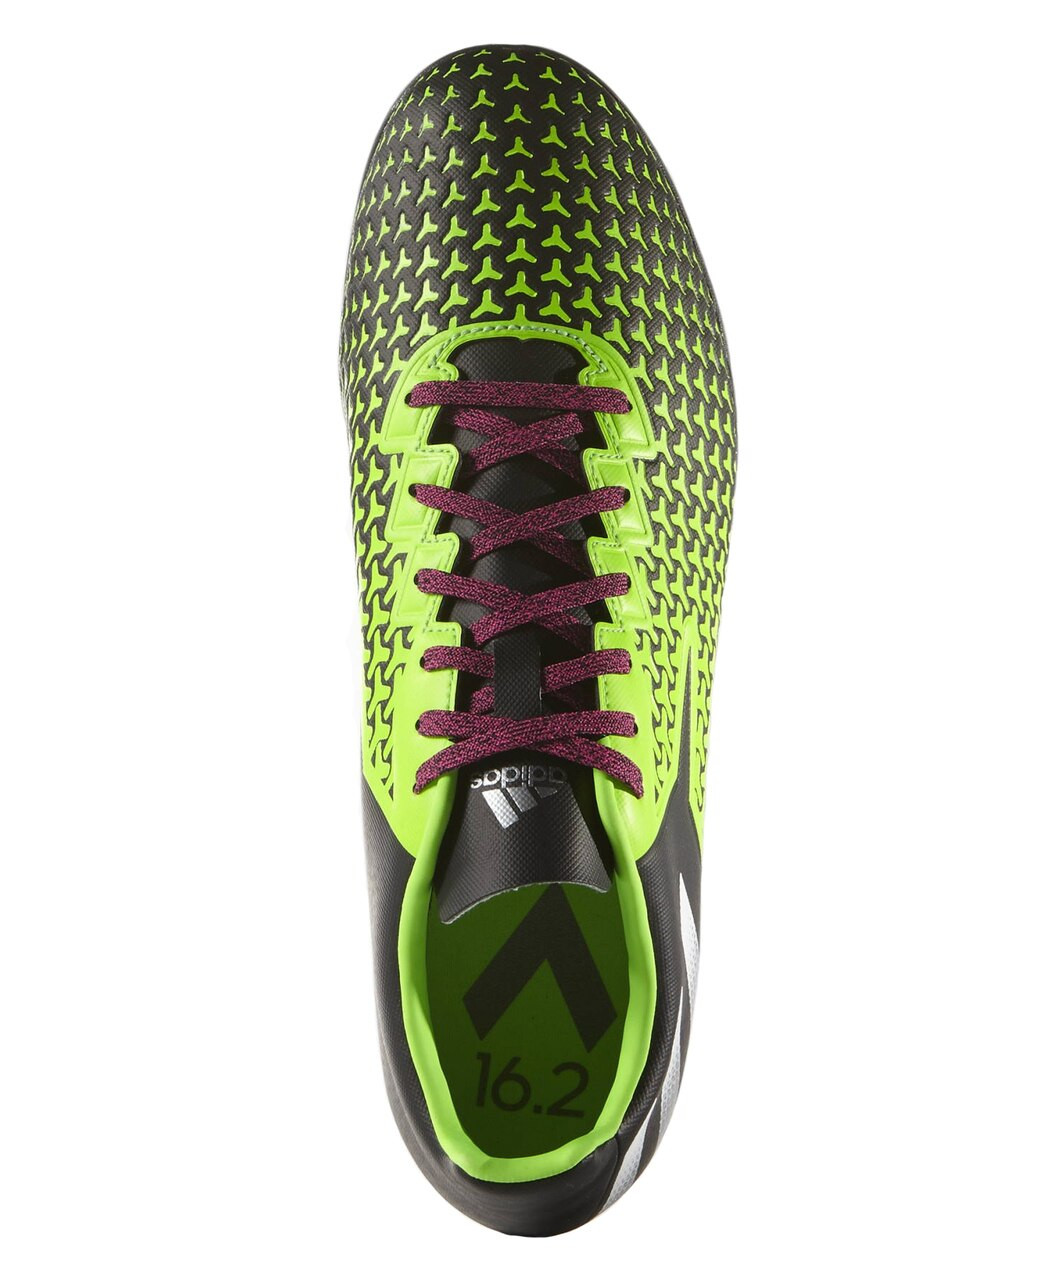 Adidas ACE 16.2 Cage Shoes - Core Black/Running White/Neon Green- SD  (72222) - ohp soccer